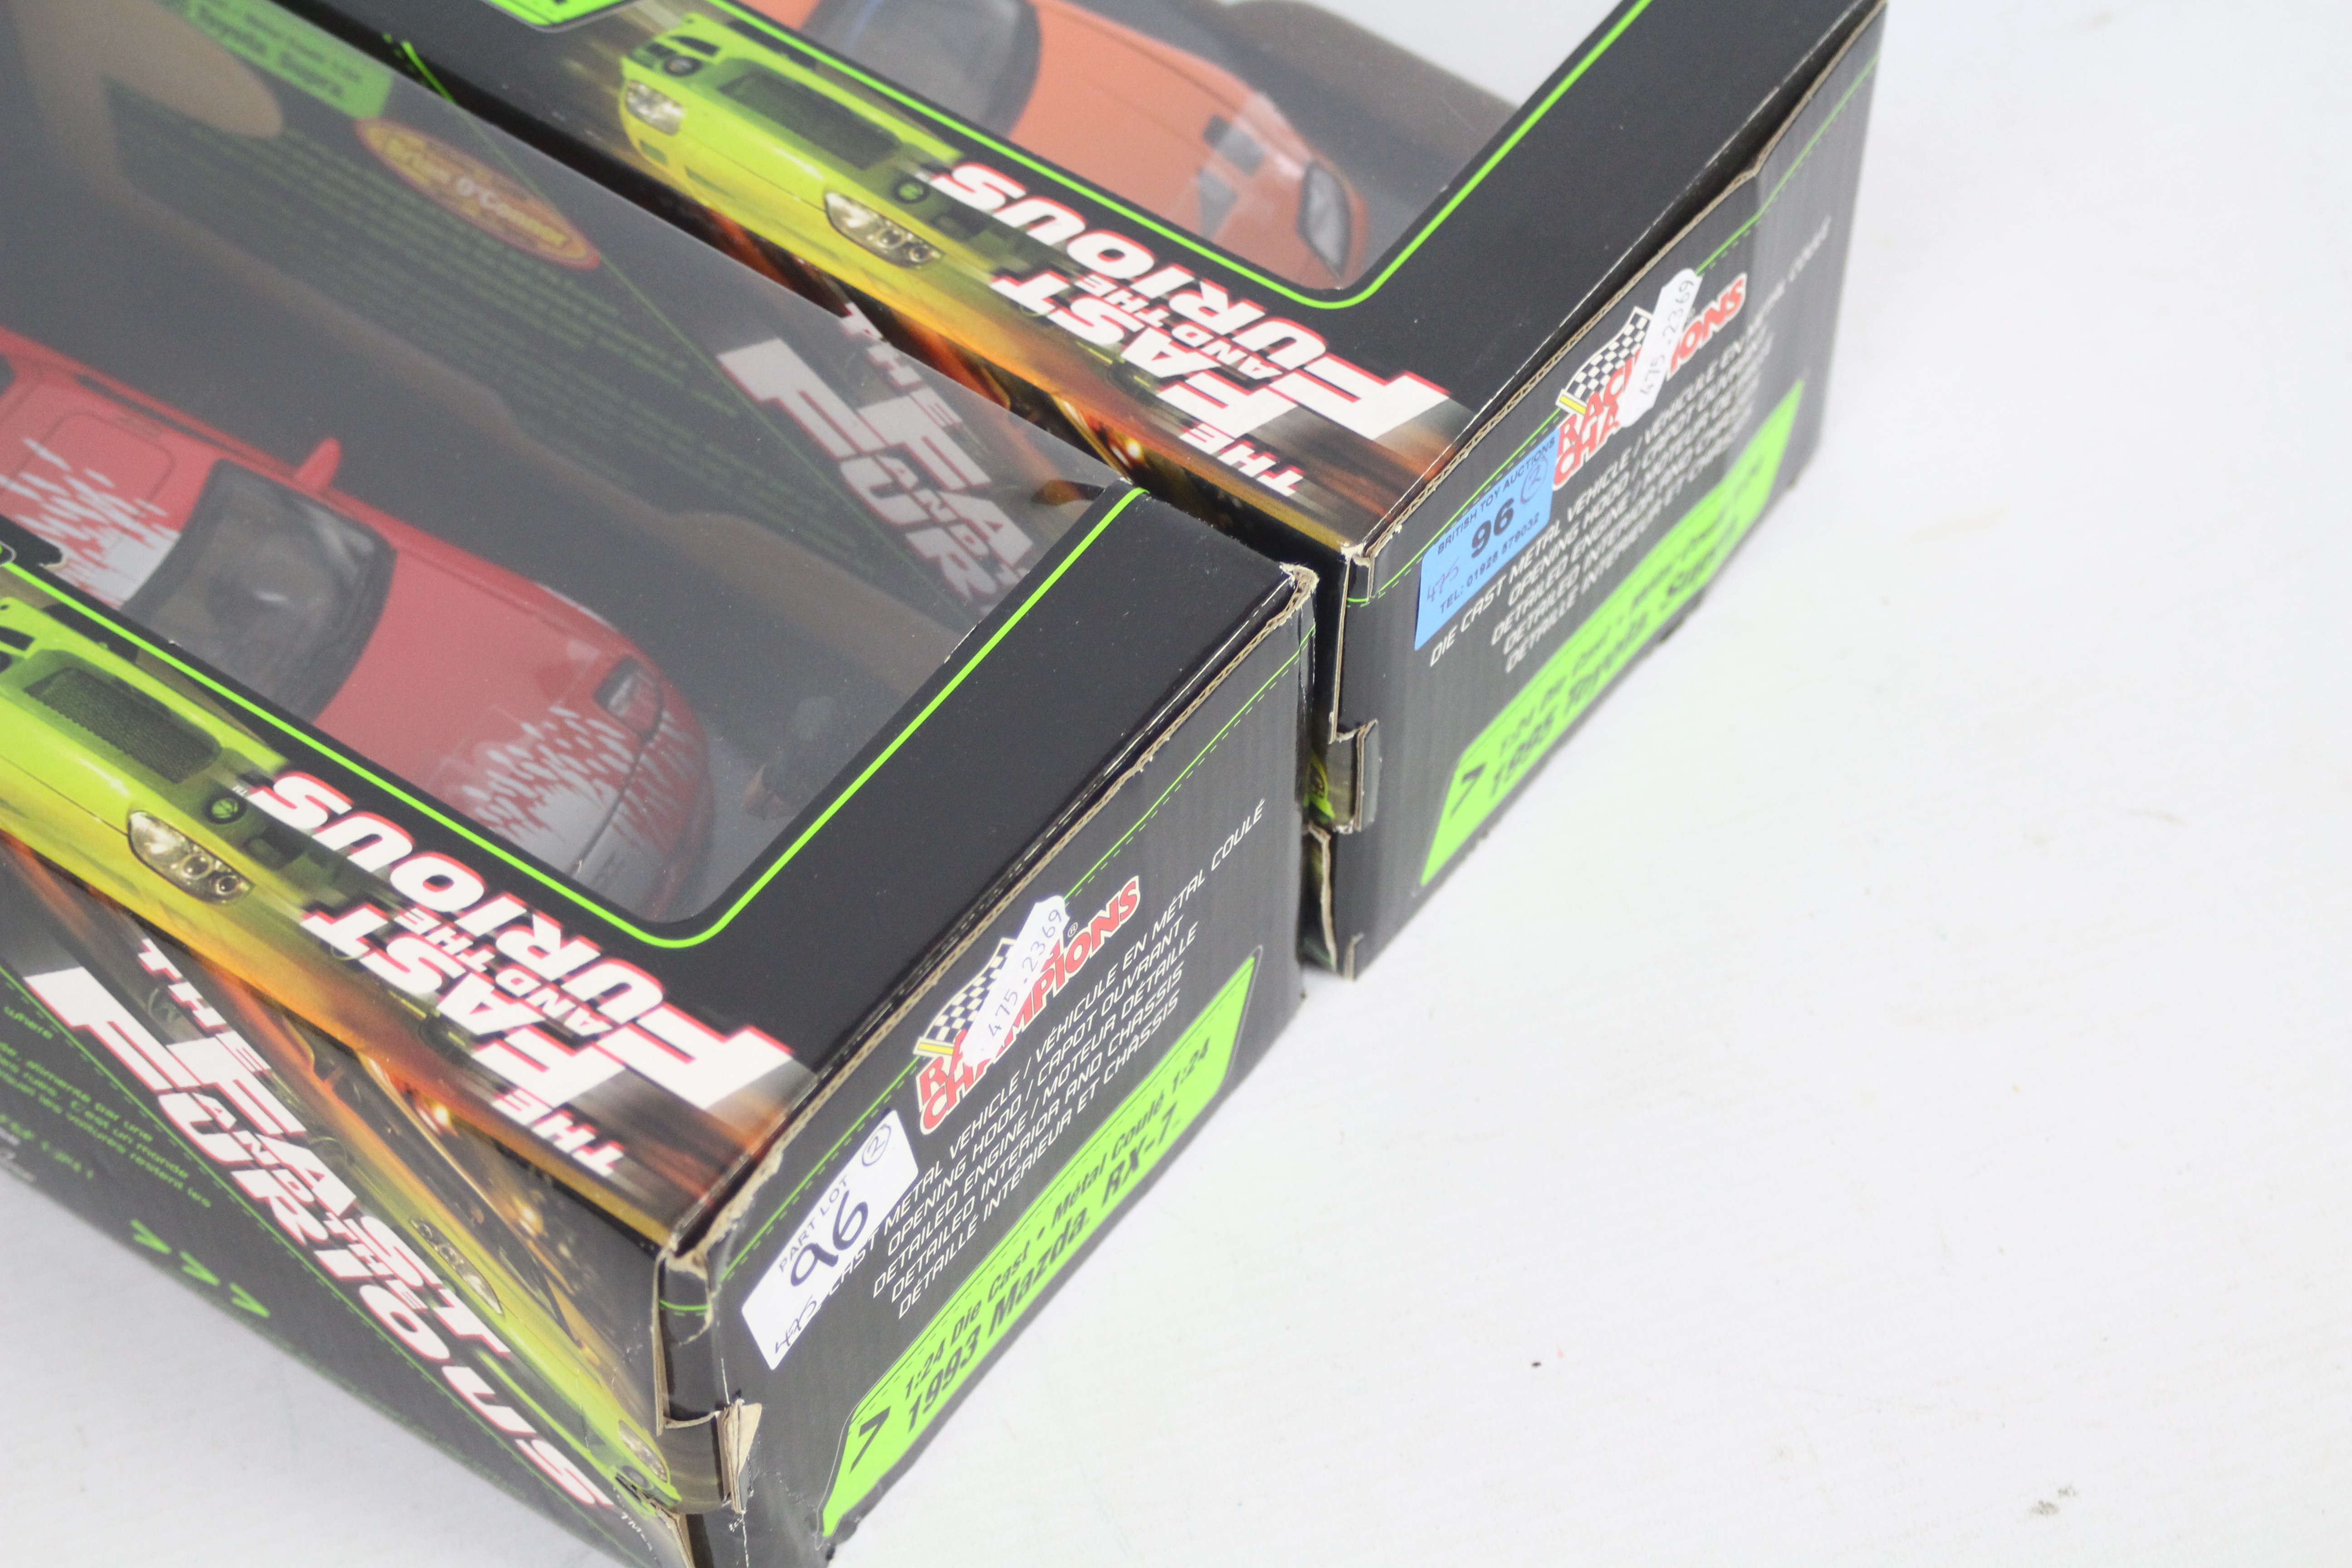 Racing Champions / Ertl - Two boxed 1:24 scale 'Fast & Furious' diecast model cars. - Image 3 of 3